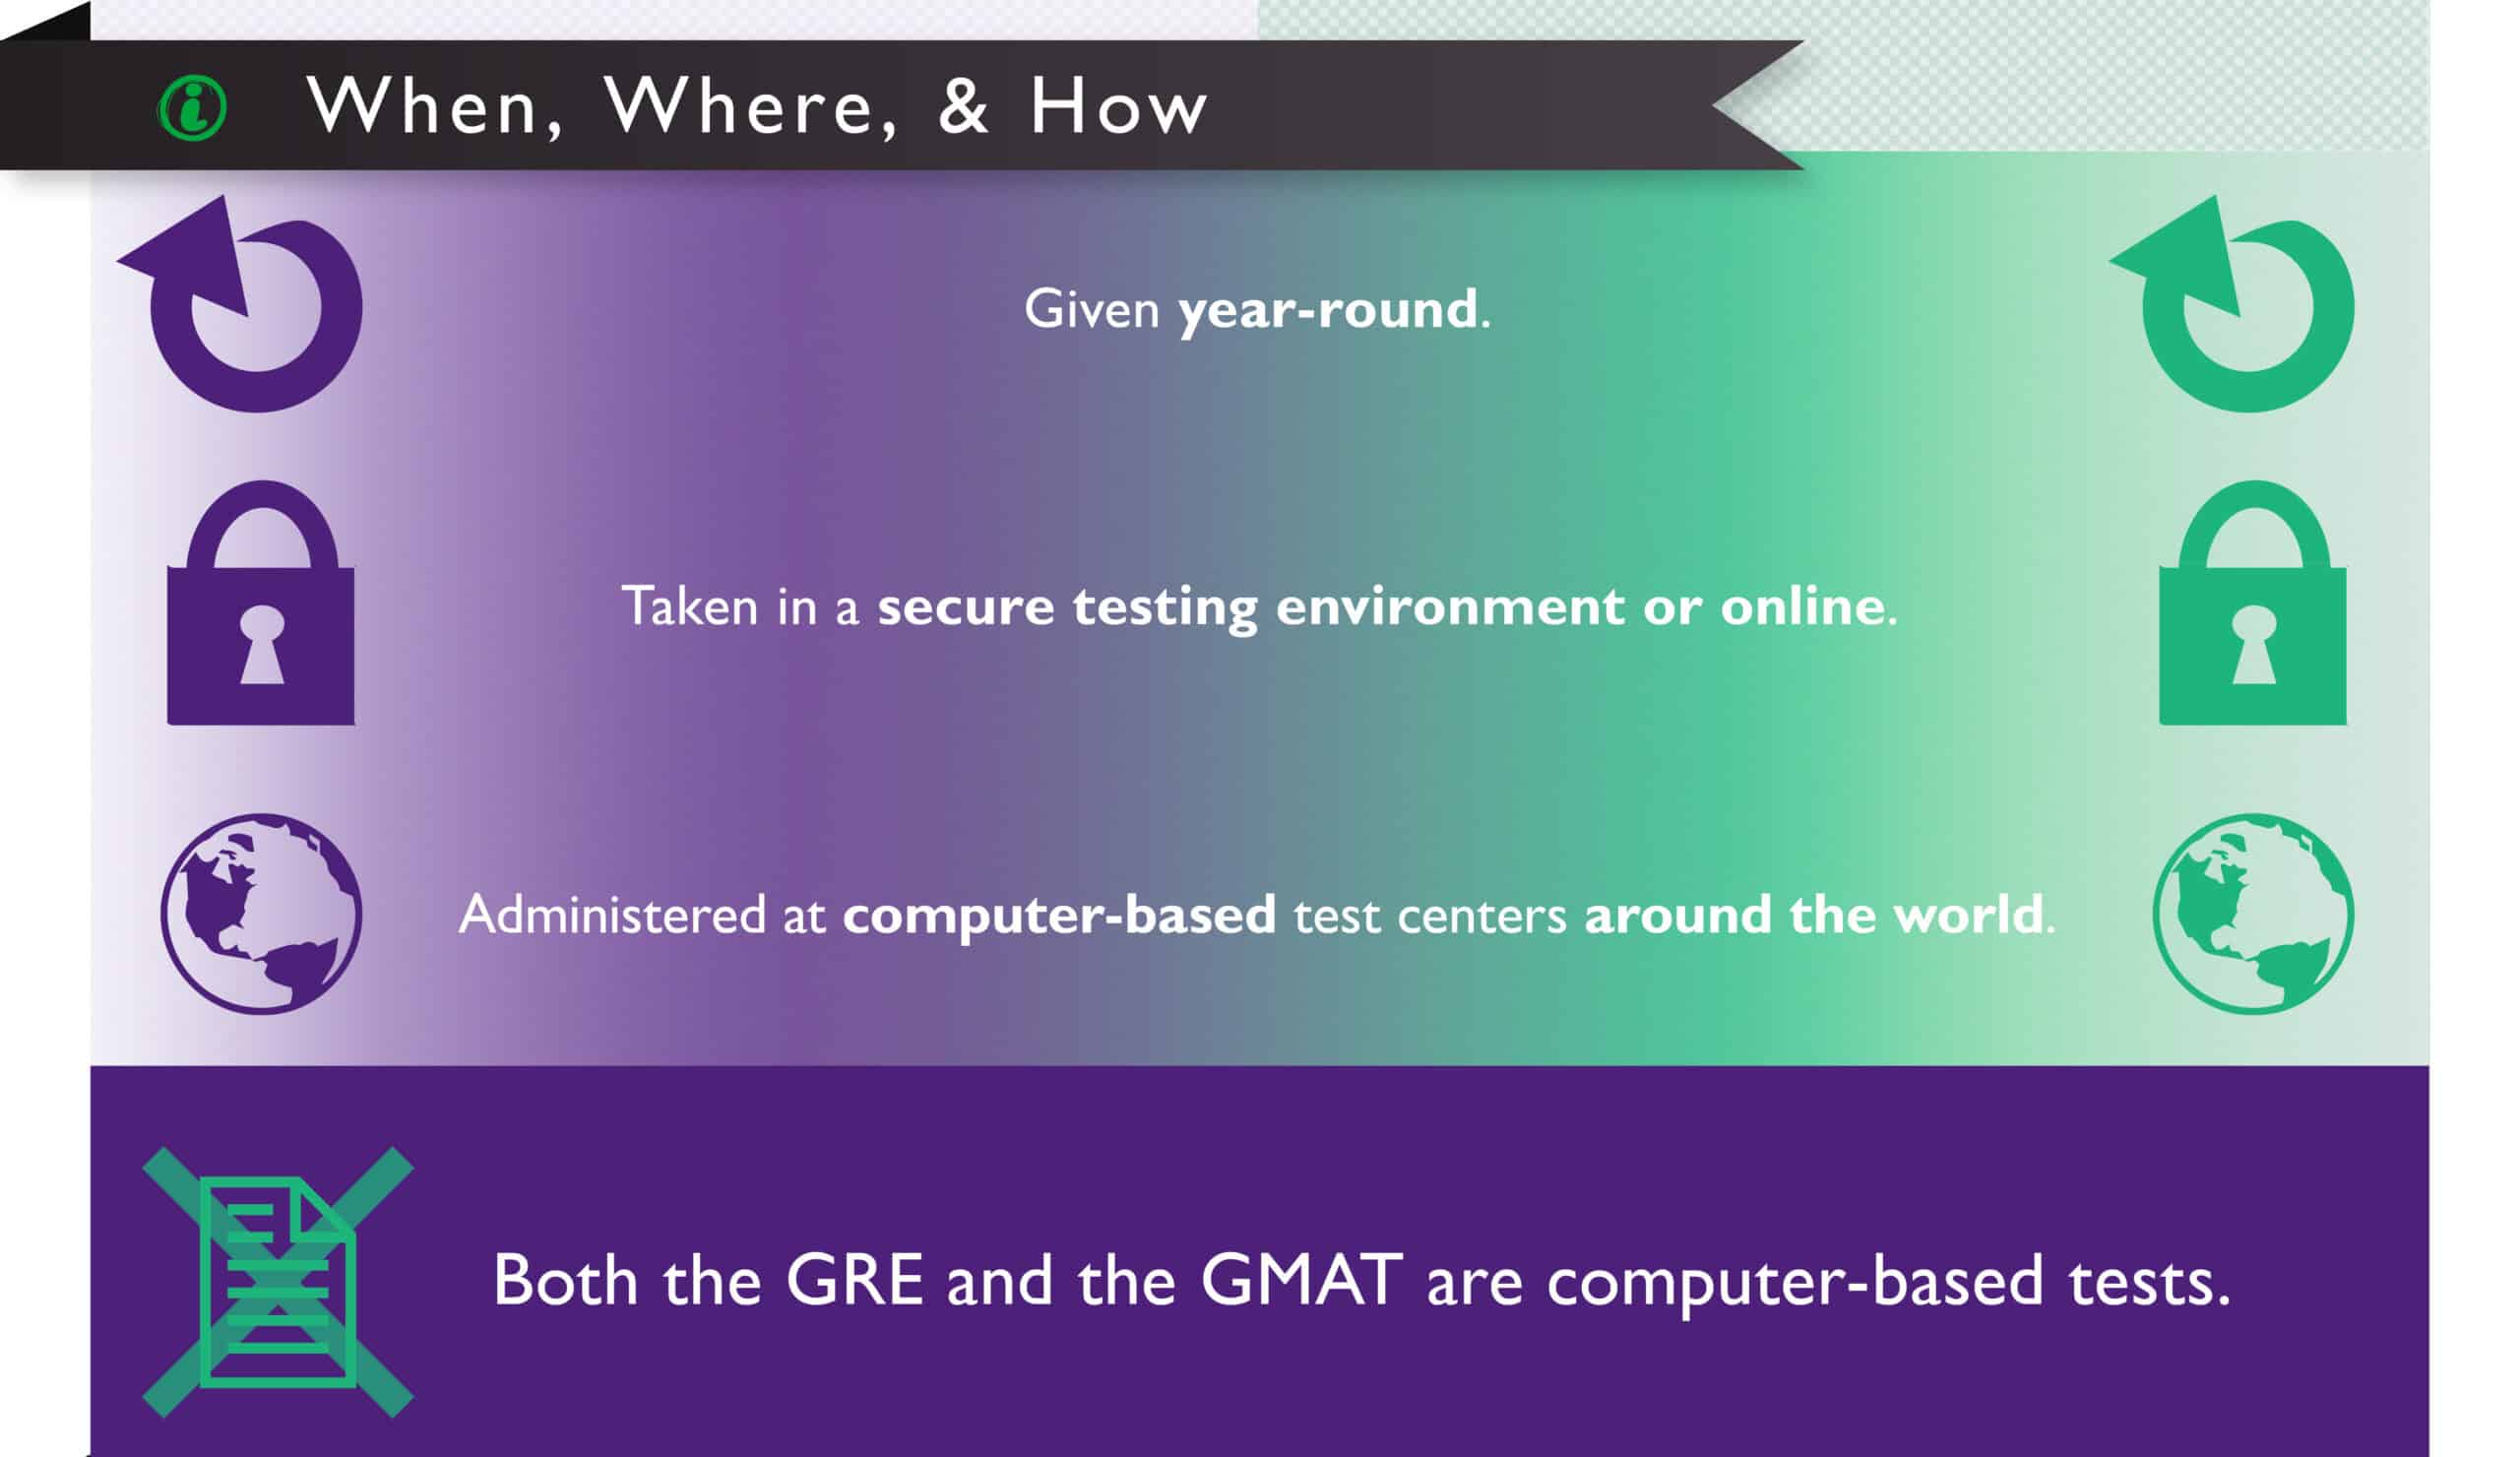 GMAT vs. GRE When, Where, How - infographic by Magoosh